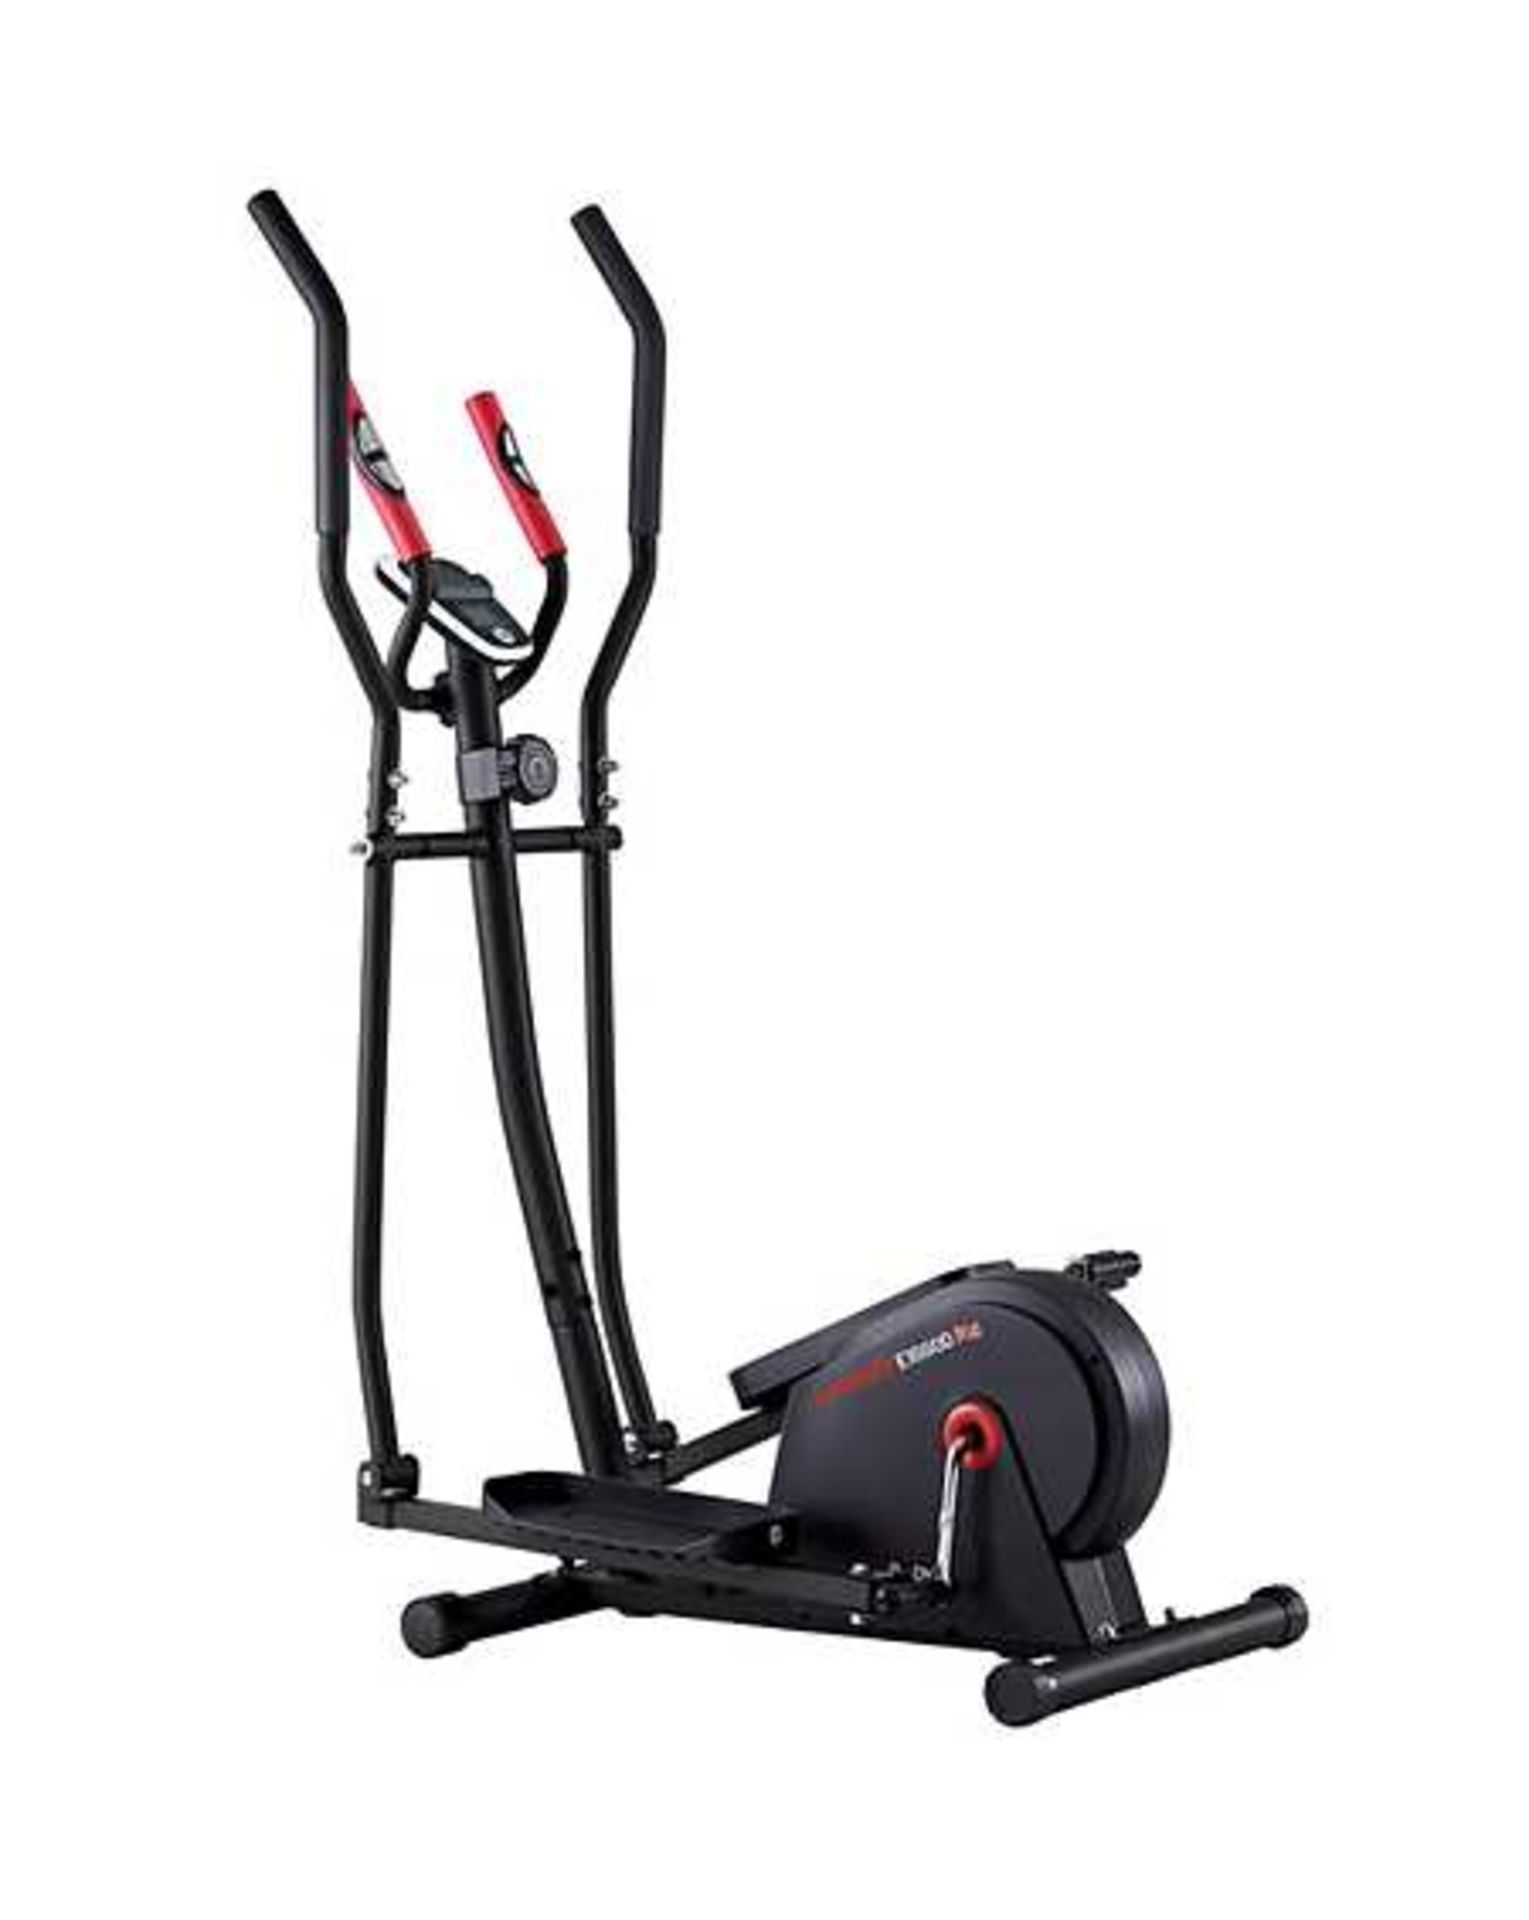 NEW & BOXED BODY SCULPTURE Magnetic Strider. RRP £189.99 R13-15. Magnetic resistance for a smooth